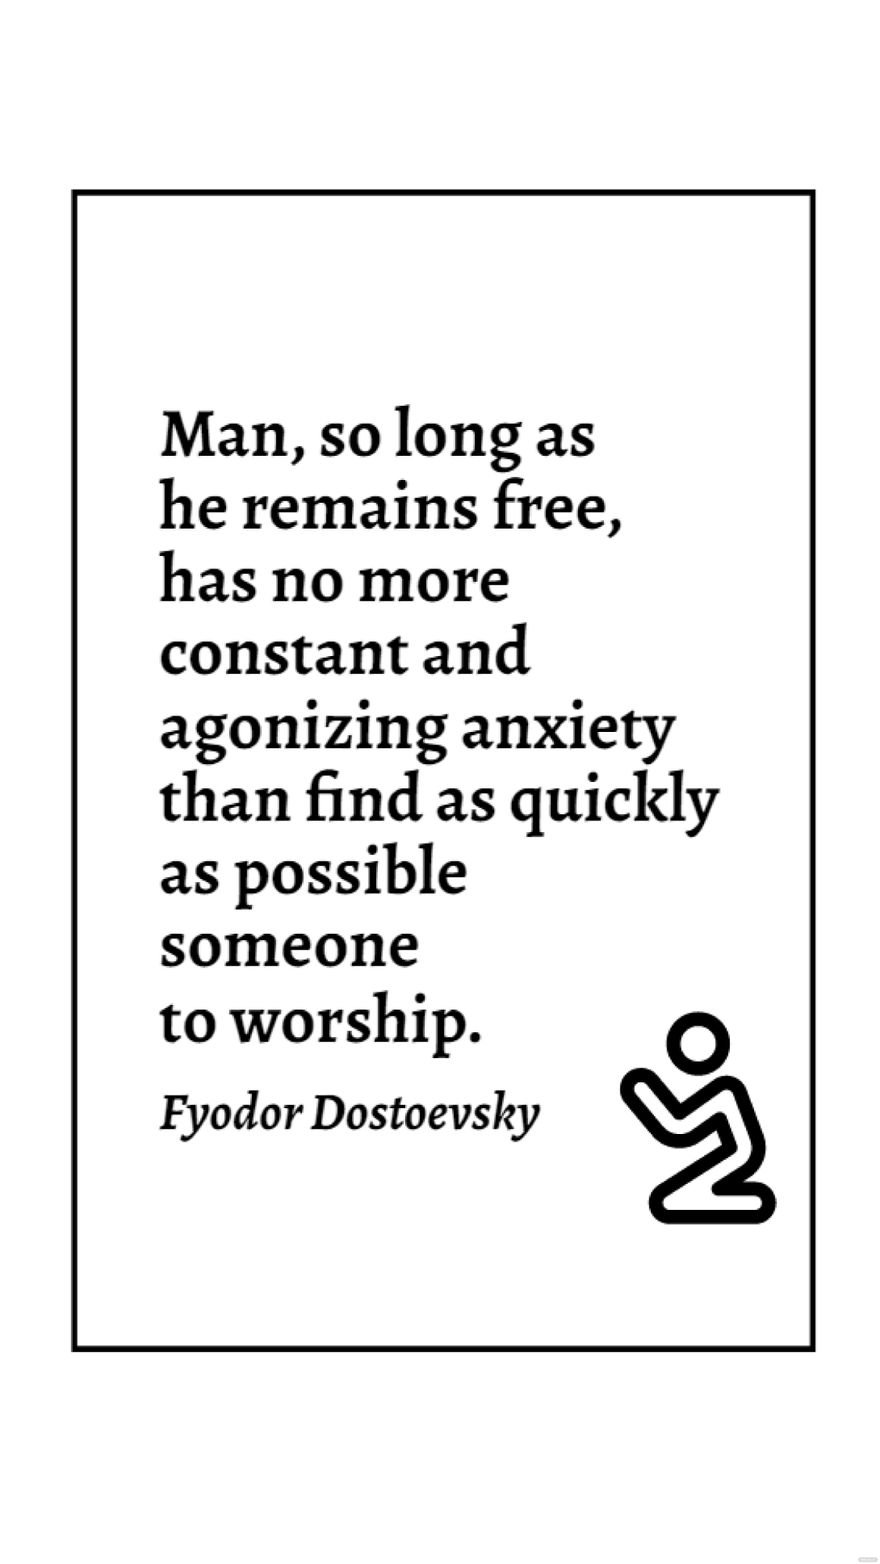 Fyodor Dostoevsky - Man, so long as he remains free, has no more constant and agonizing anxiety than find as quickly as possible someone to worship.